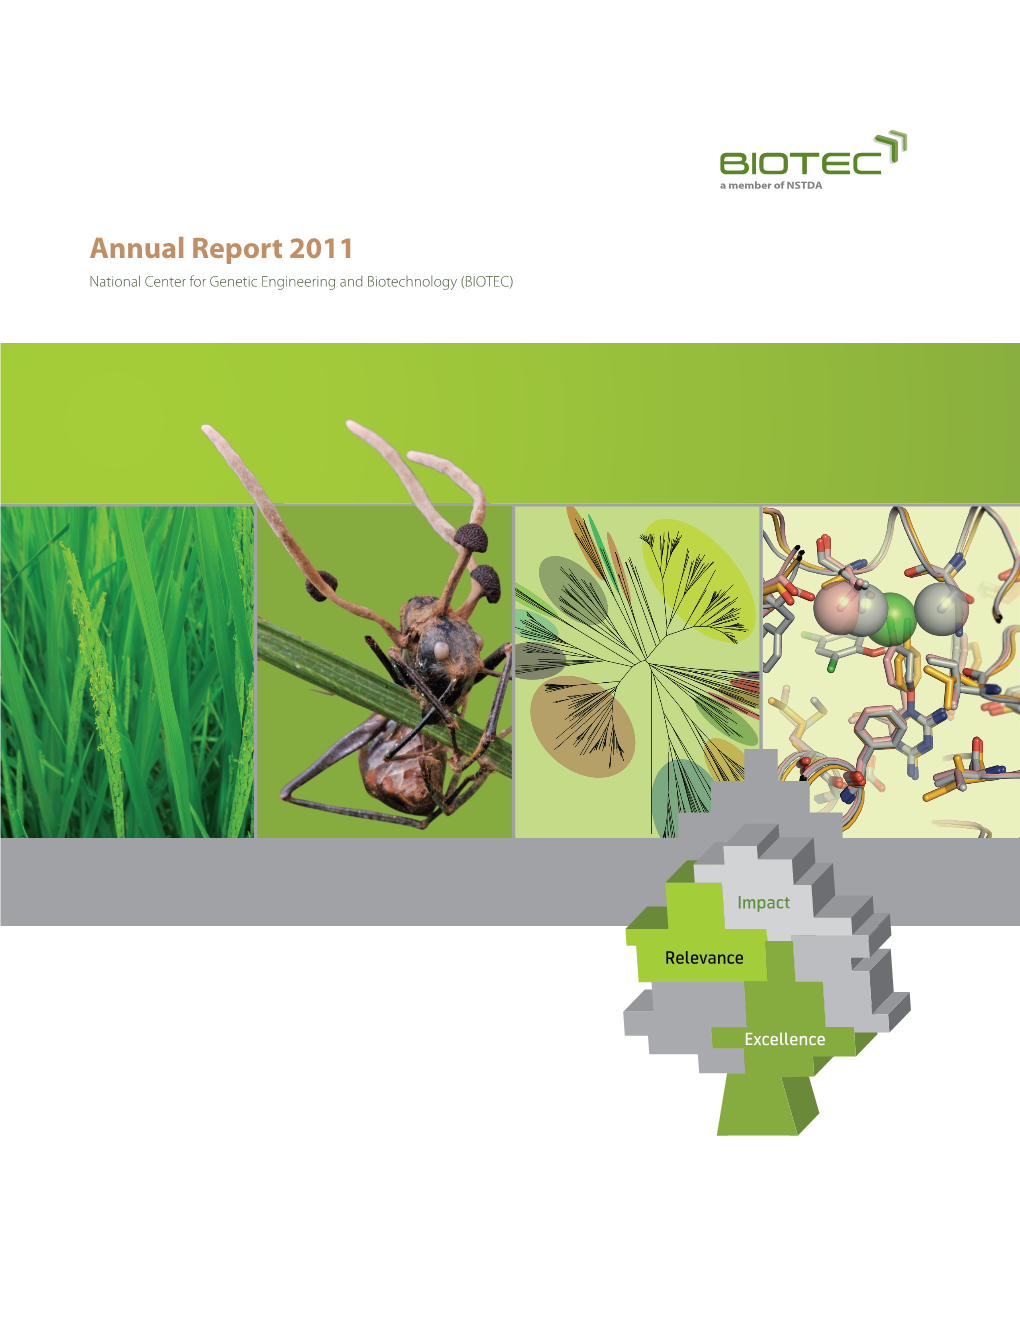 Annual Report 2011 National Center for Genetic Engineering and Biotechnology (BIOTEC)